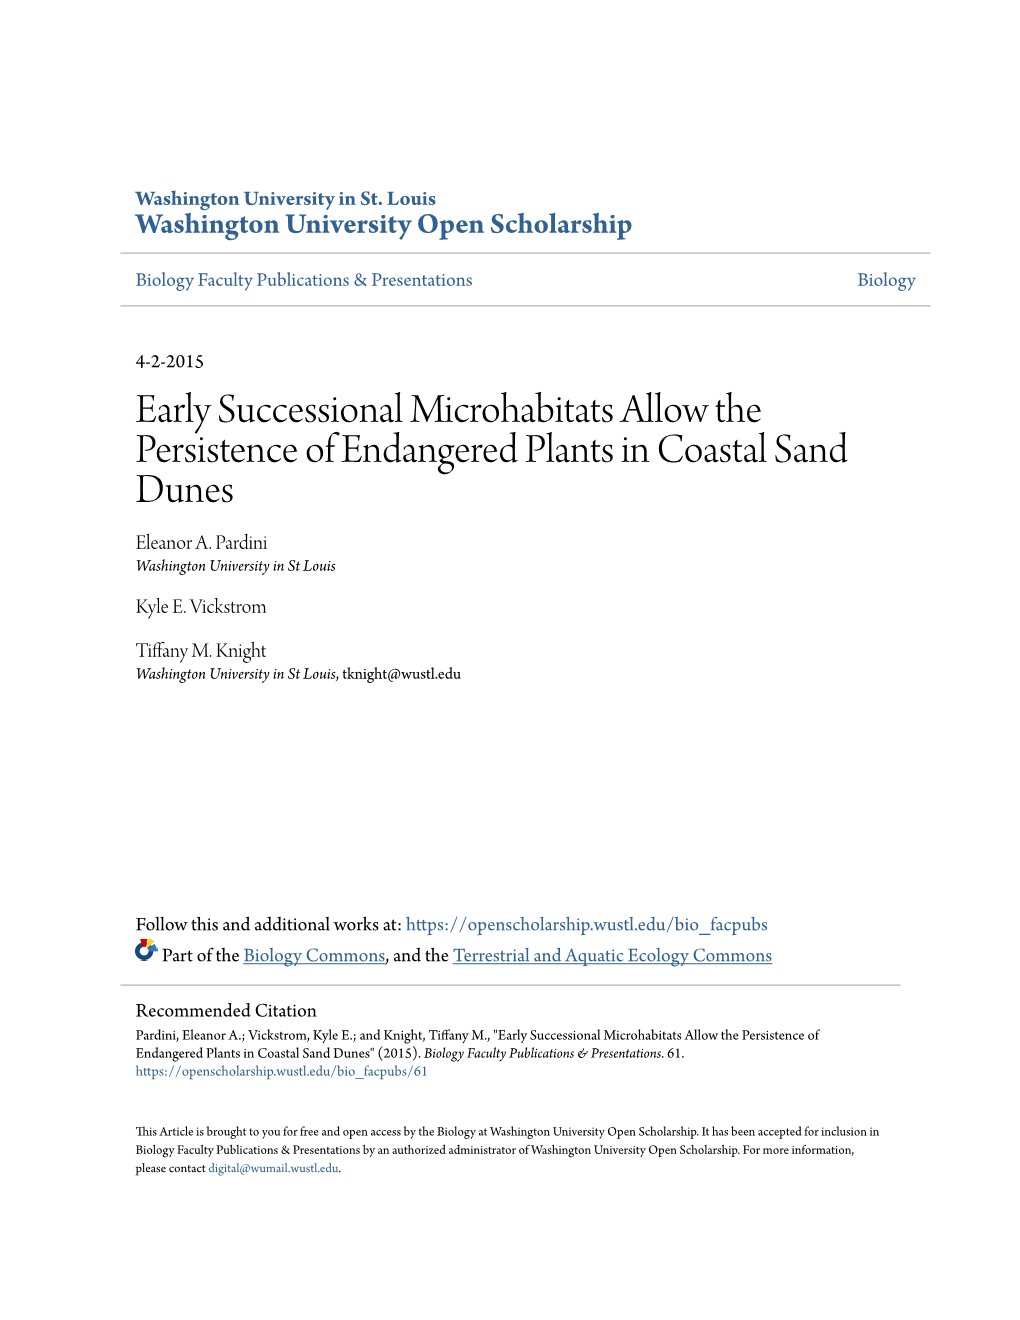 Early Successional Microhabitats Allow the Persistence of Endangered Plants in Coastal Sand Dunes Eleanor A